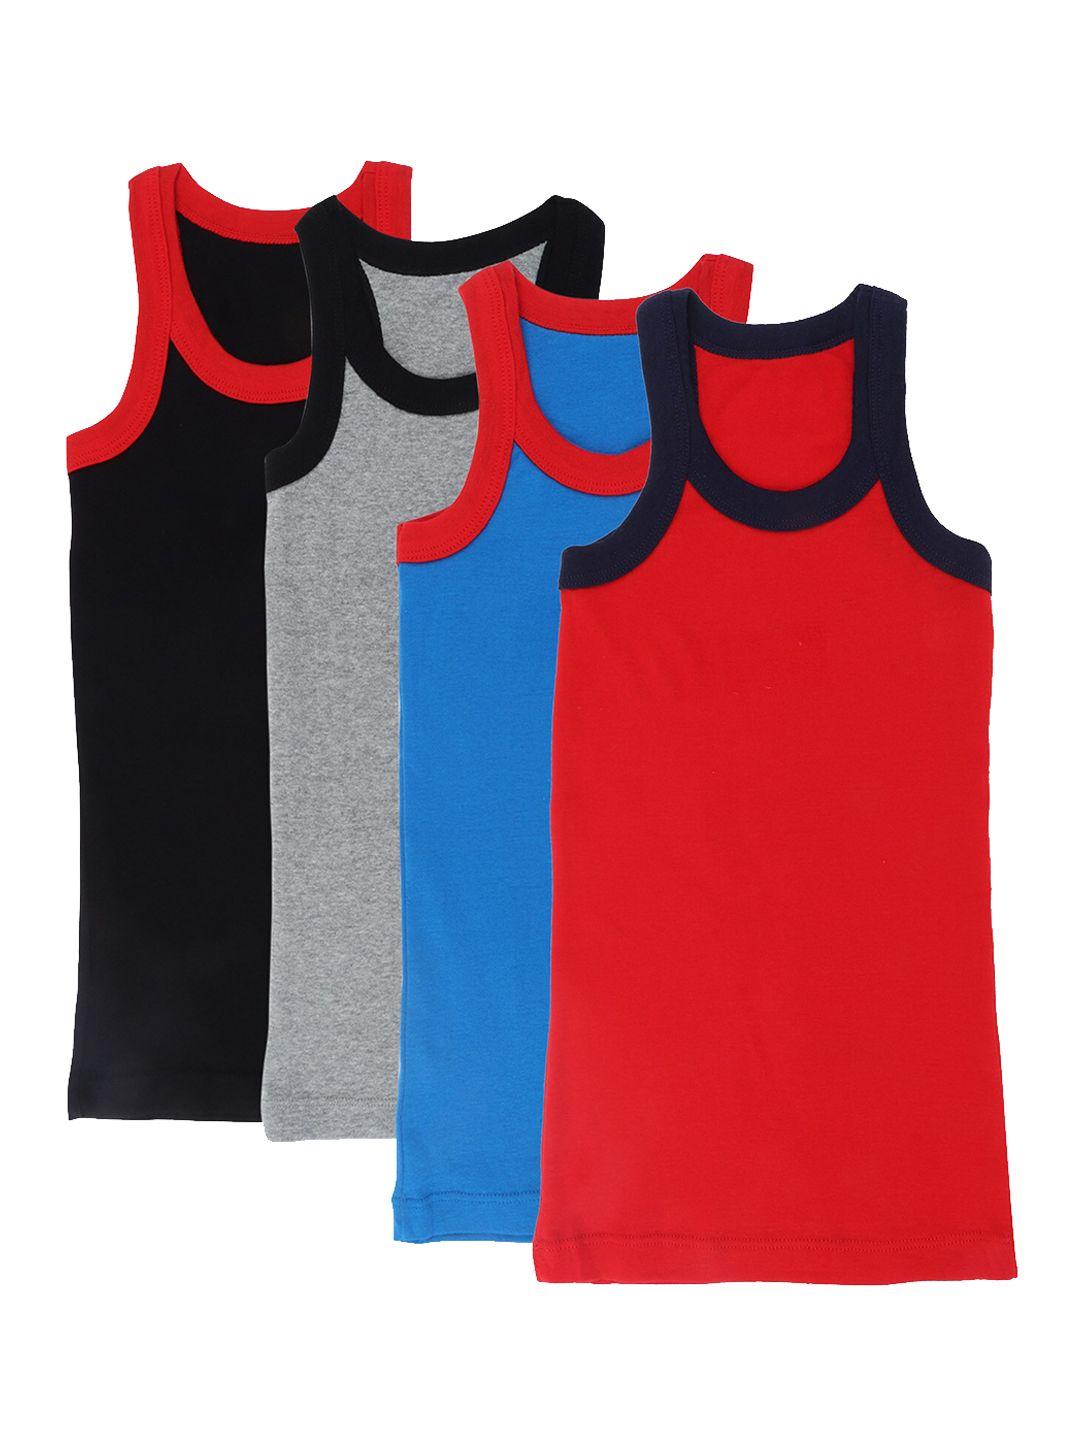 dyca boys pack of 4 assorted cotton innerwear vests